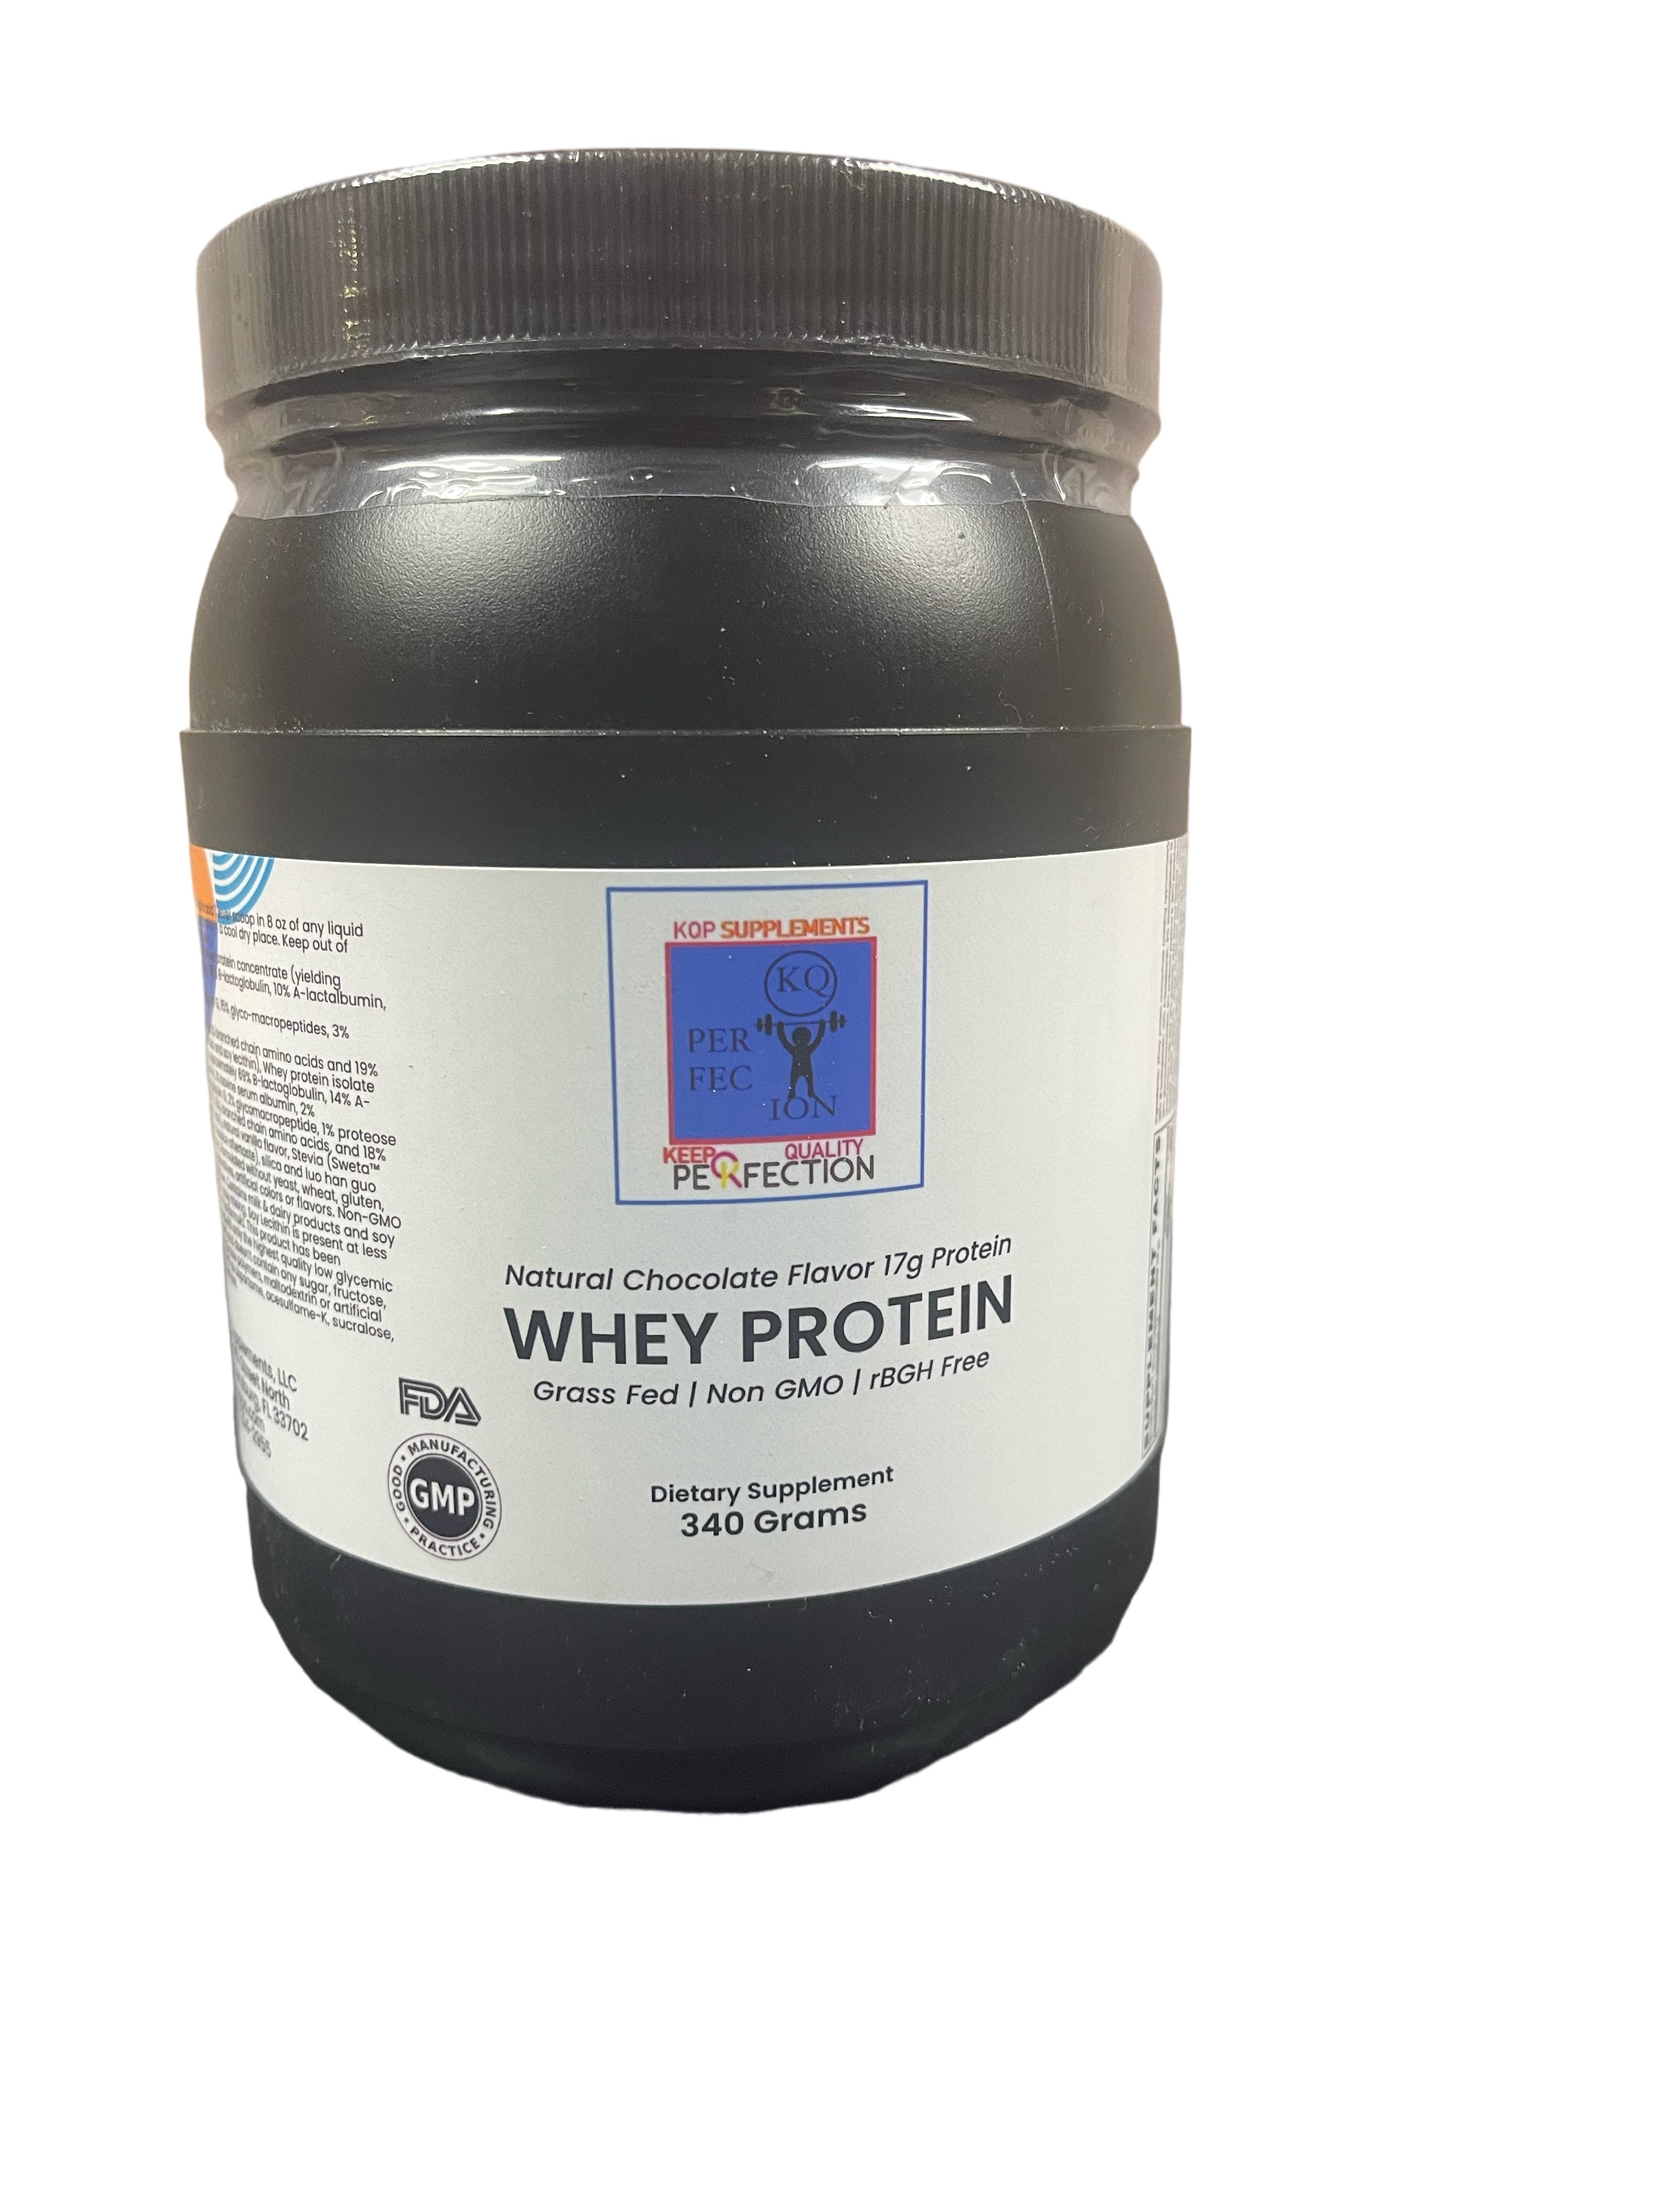 WHEY PROTEIN Chocolate Favor (17g Protein) | KQP Supplements